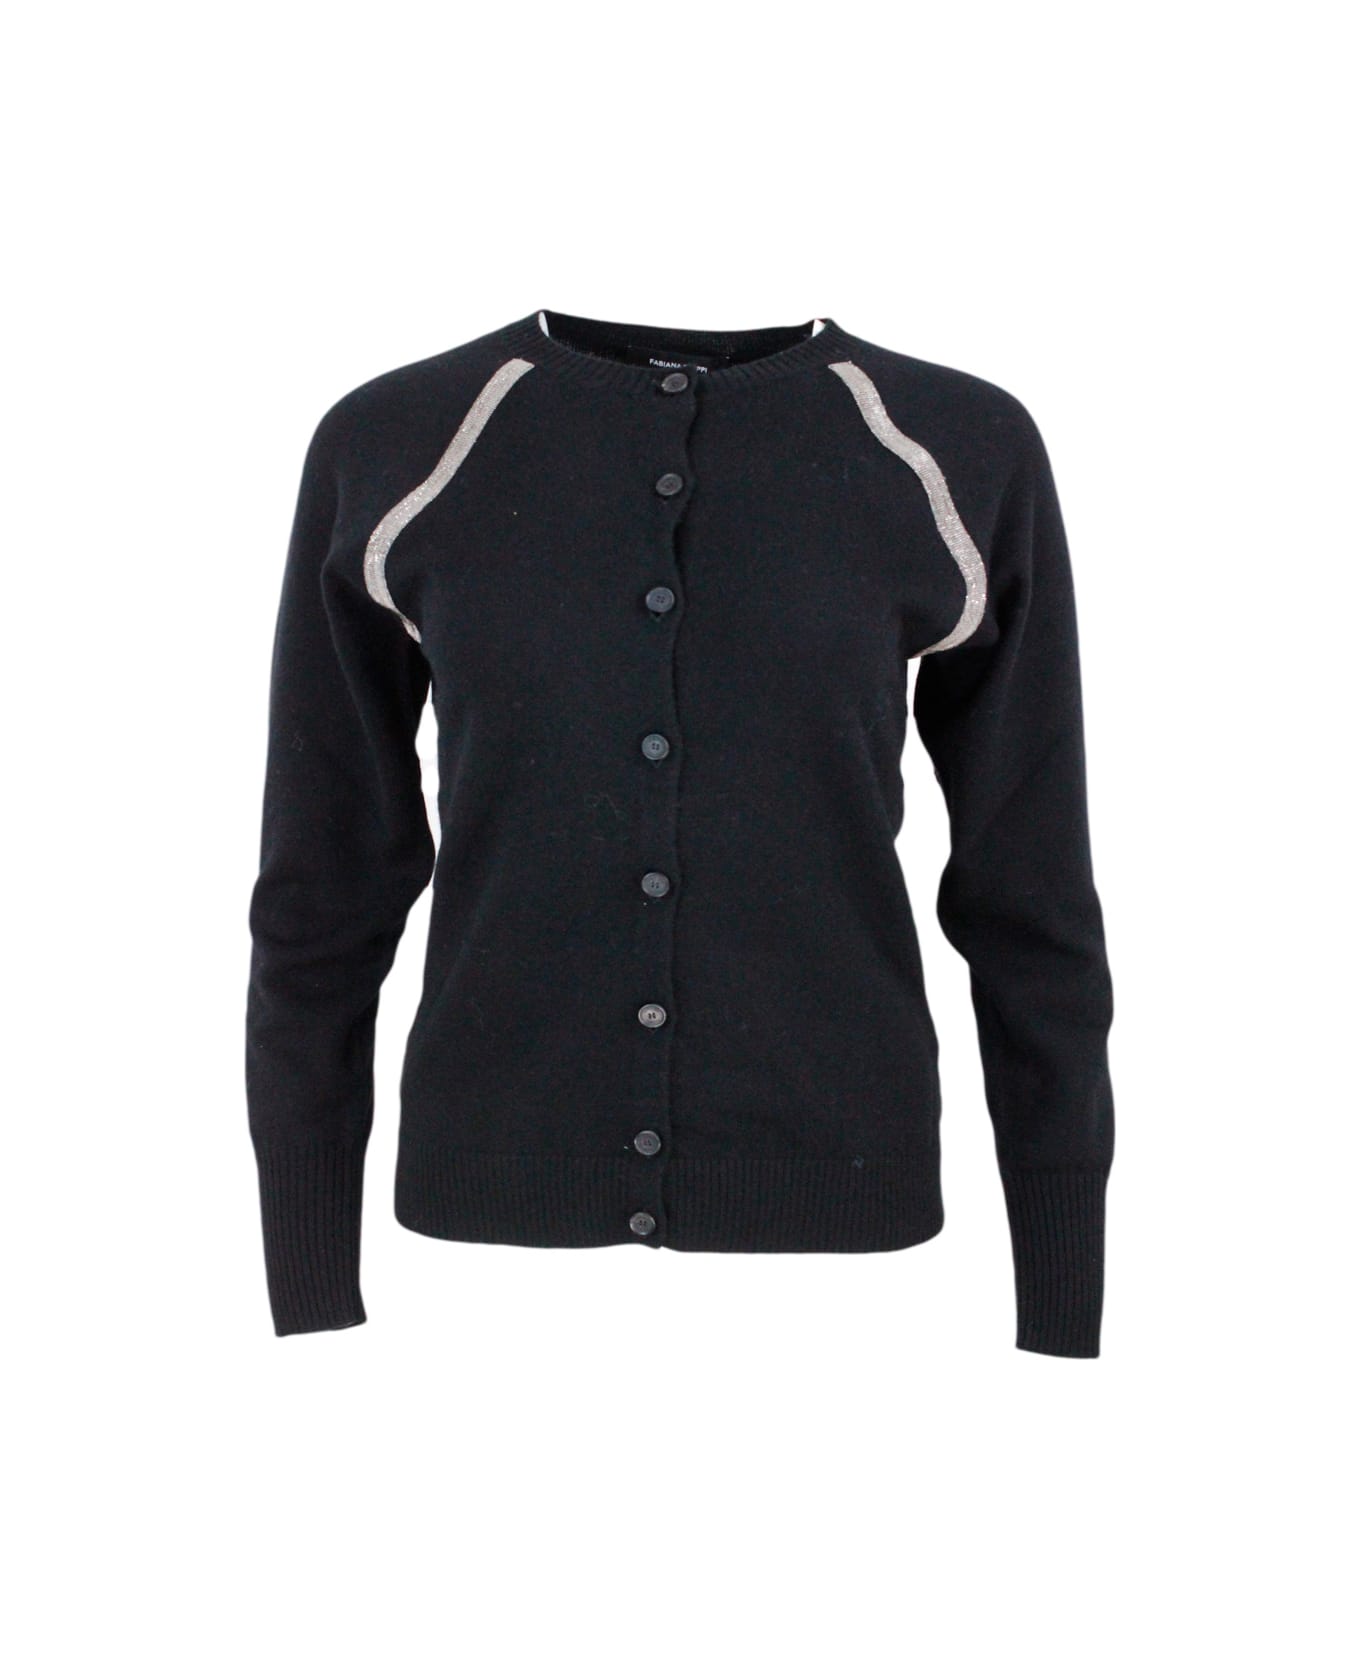 Fabiana Filippi Cardigan Sweater With Crew Neck And Button Closure In 100% Cashmere Embellished With Brilliant Monili On The Armhole - Black カーディガン